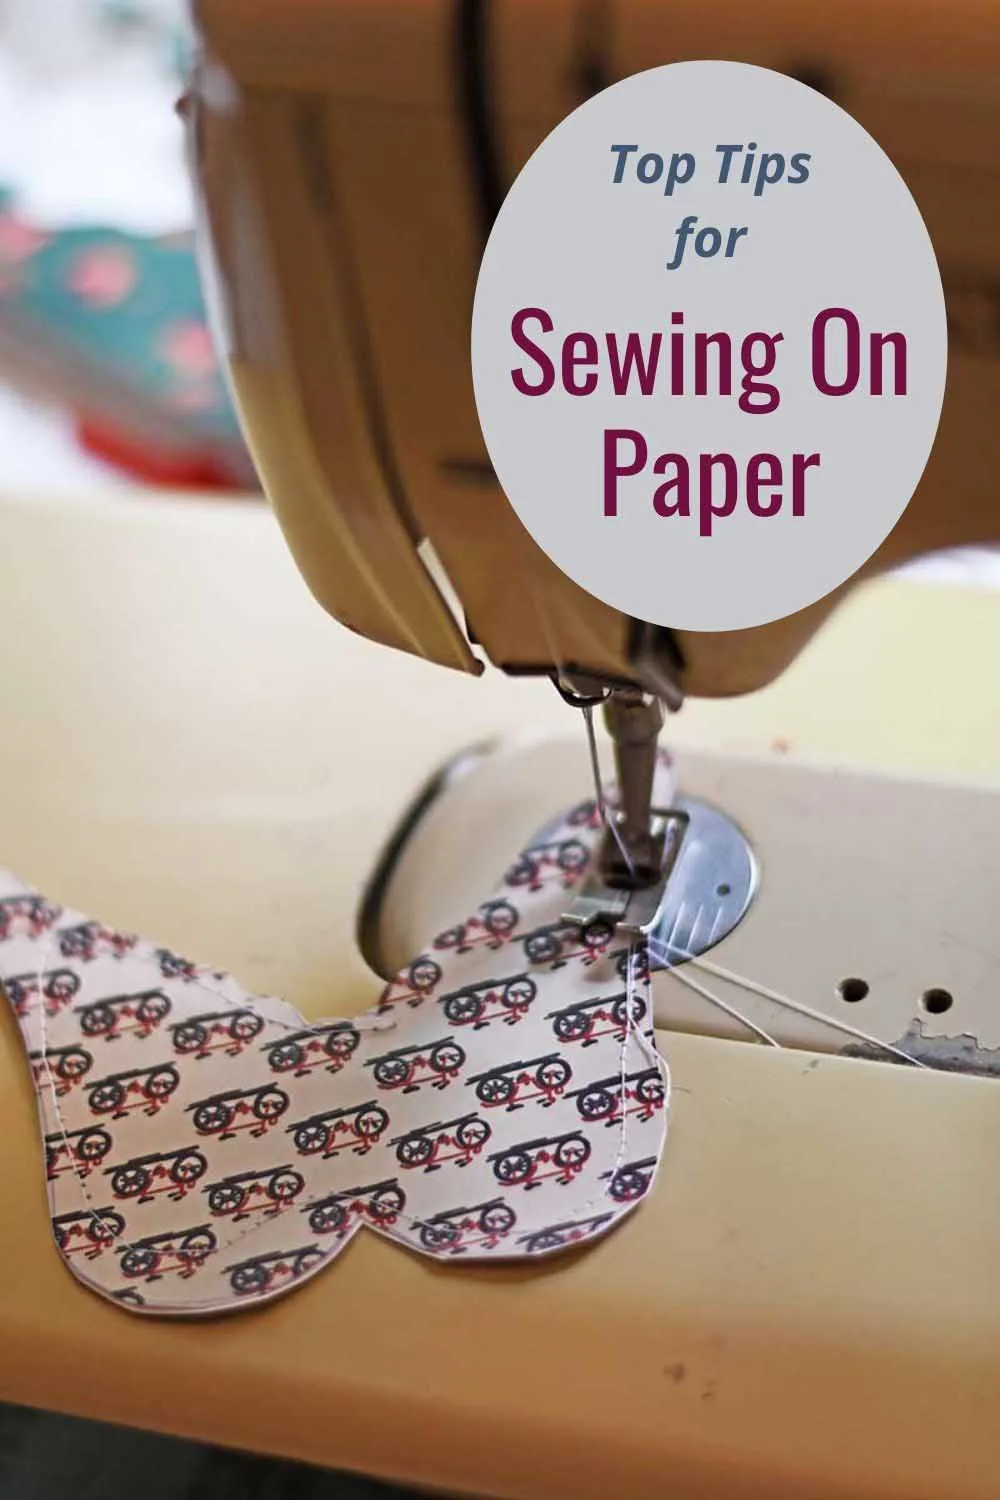 Pin on Sewing tips